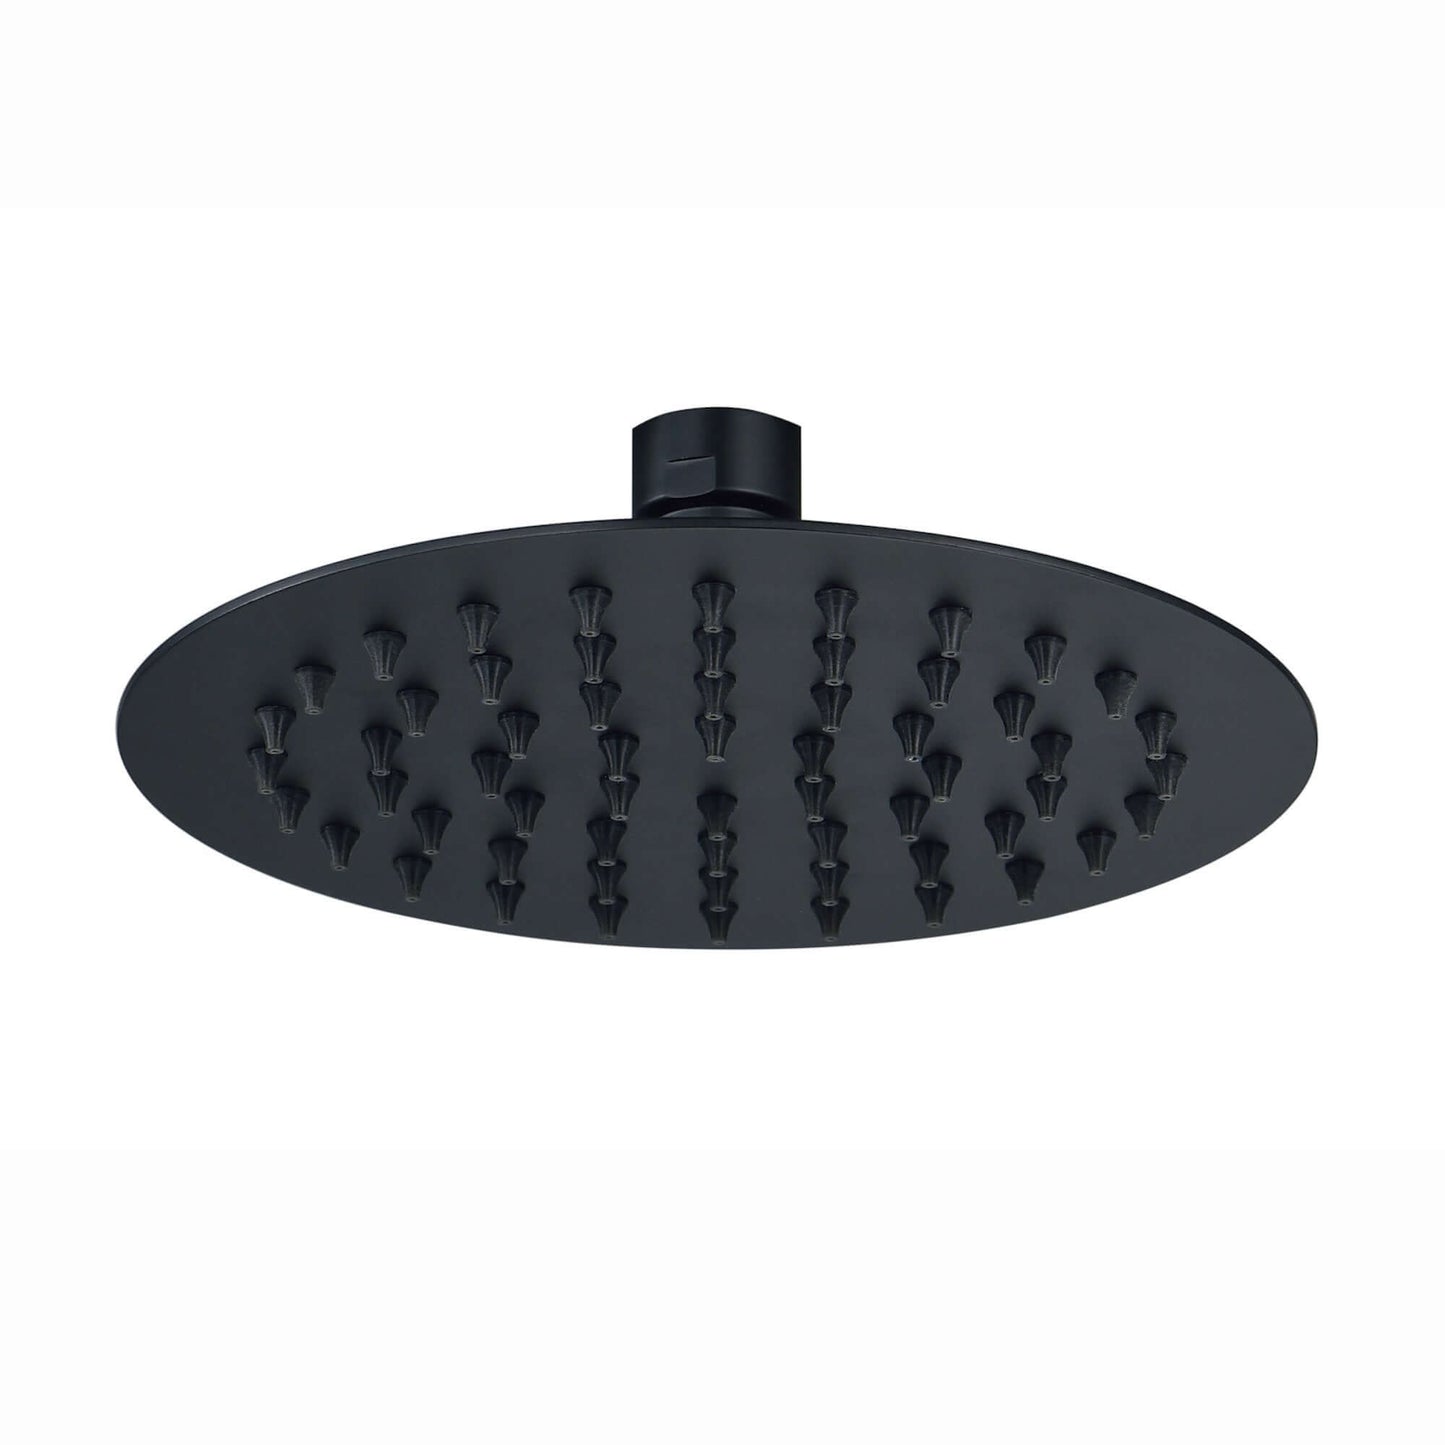 Contemporary Ceiling Fixed Round Ultra Slim Stainless Steel Shower Head 8" With 180mm Ceiling Shower Arm - Matte Black